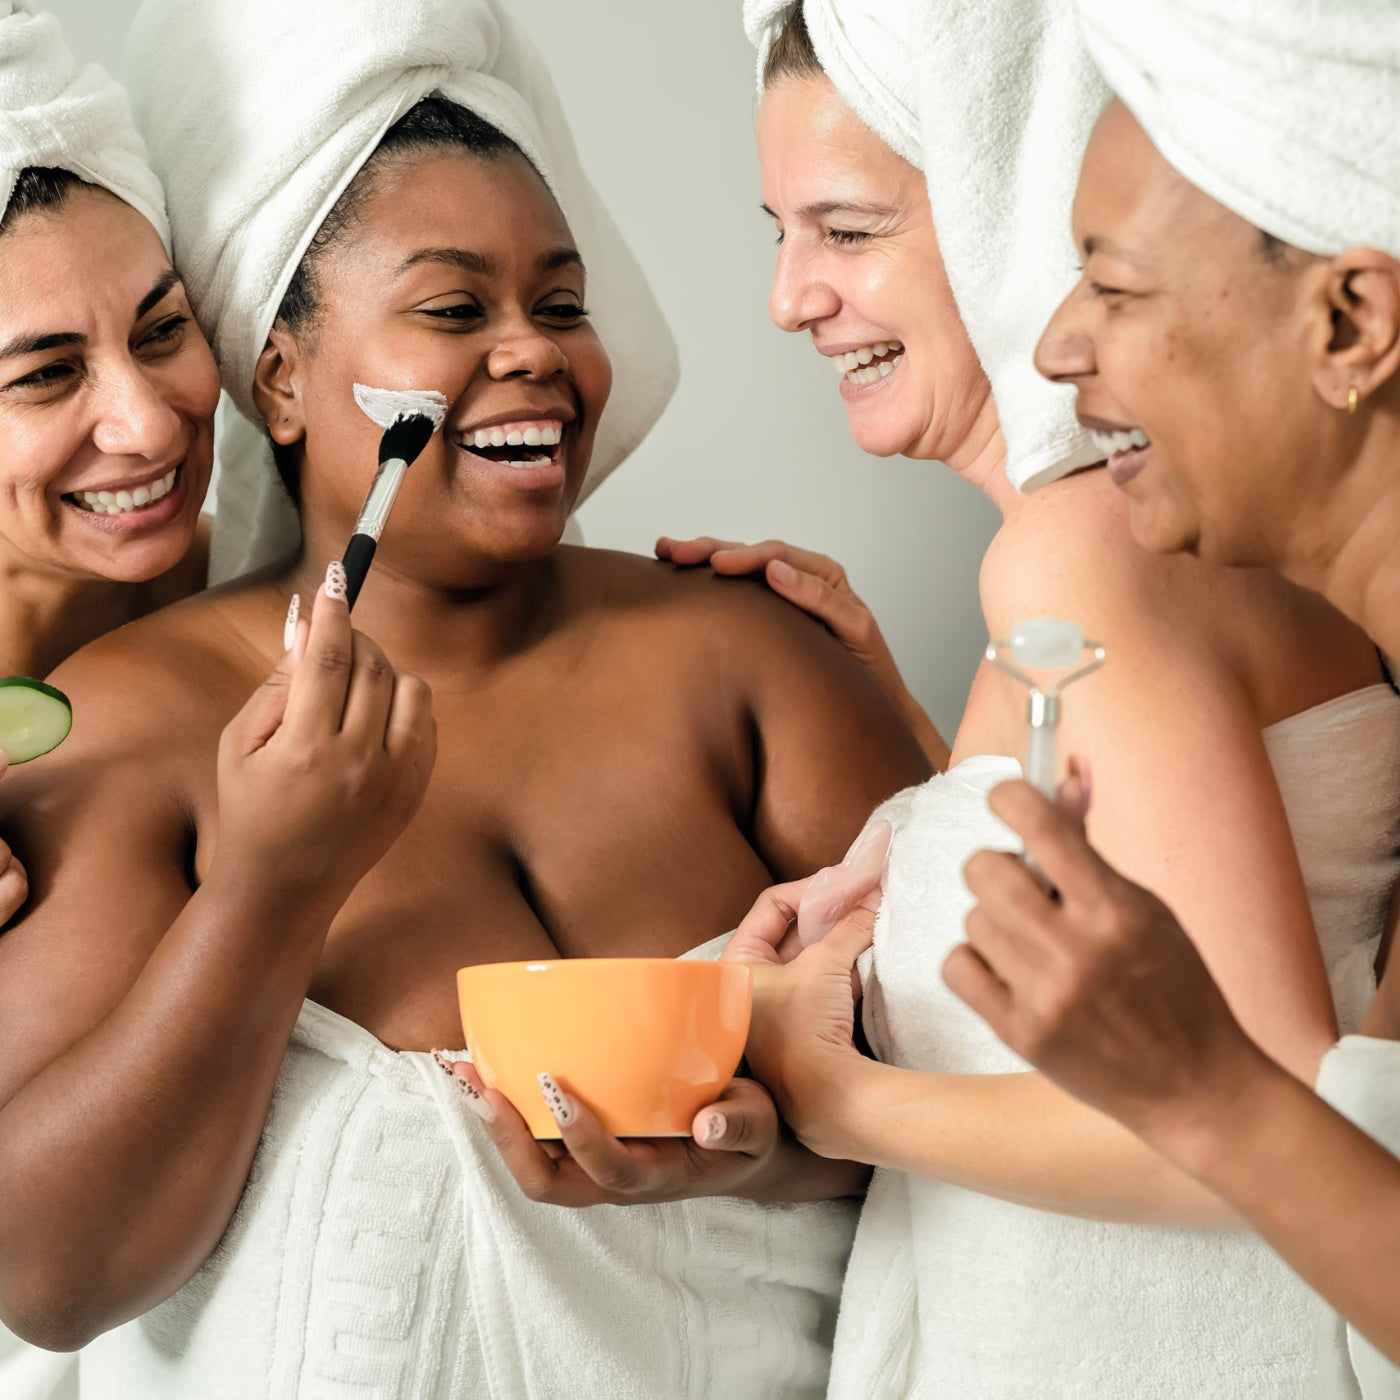 Skincare tips through the decades: Your teens, 20s, 30s, 40s, 50s, 60s & beyond